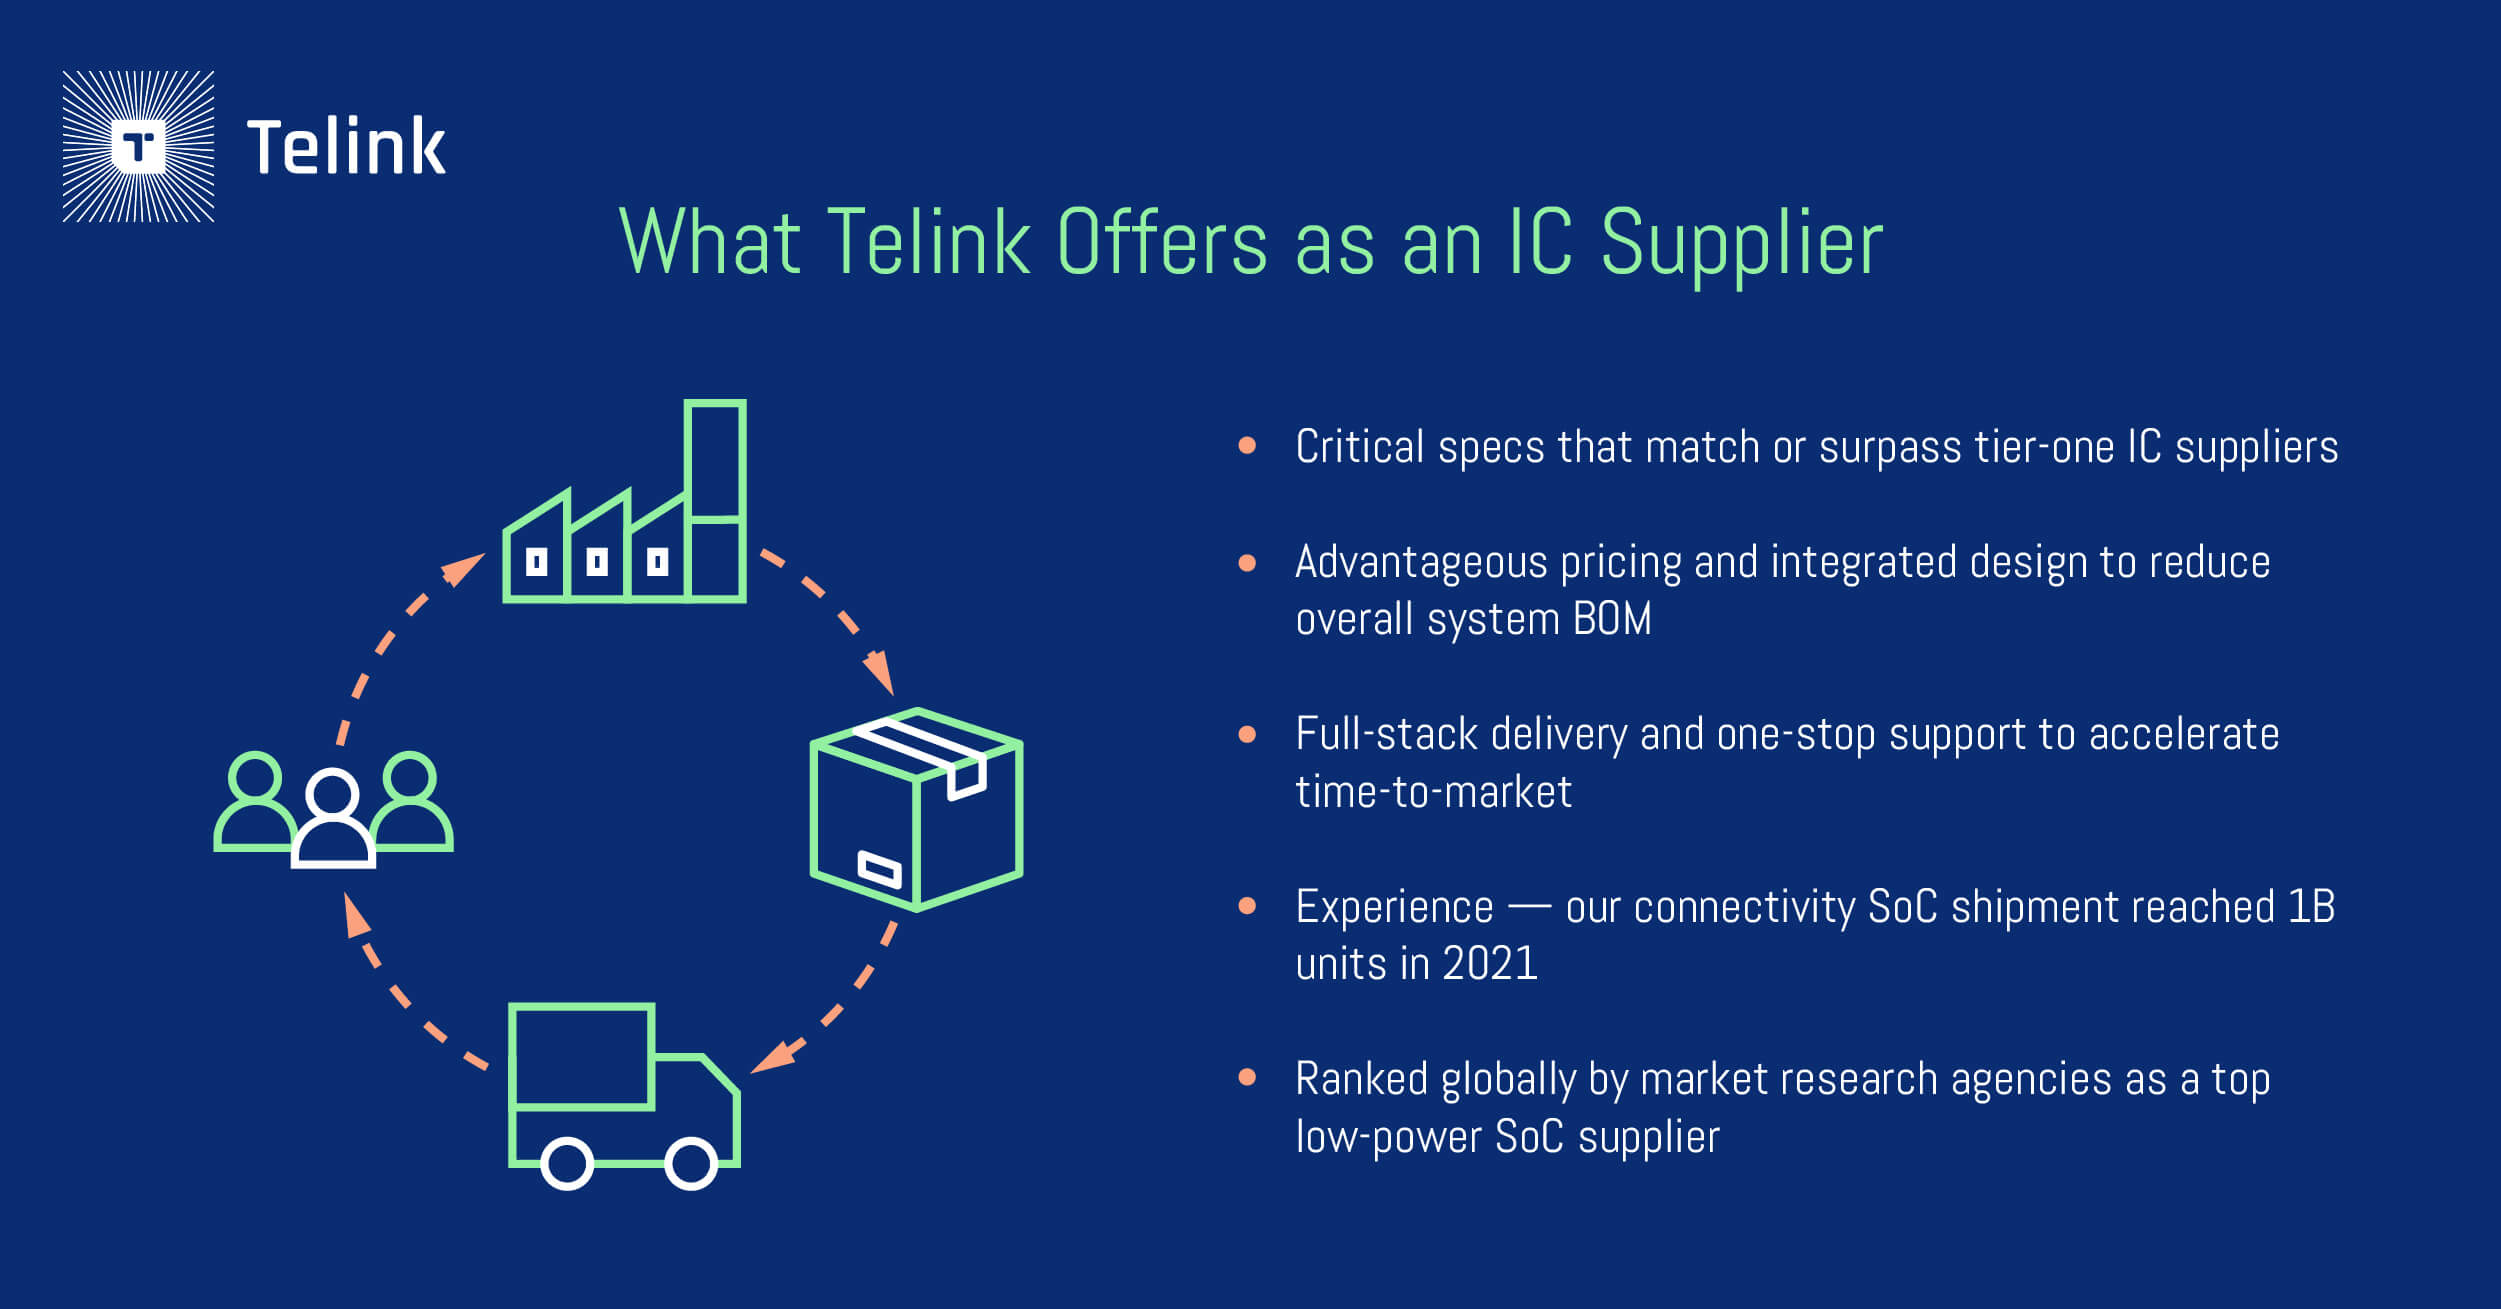 What Telink offers as an IC Supplier